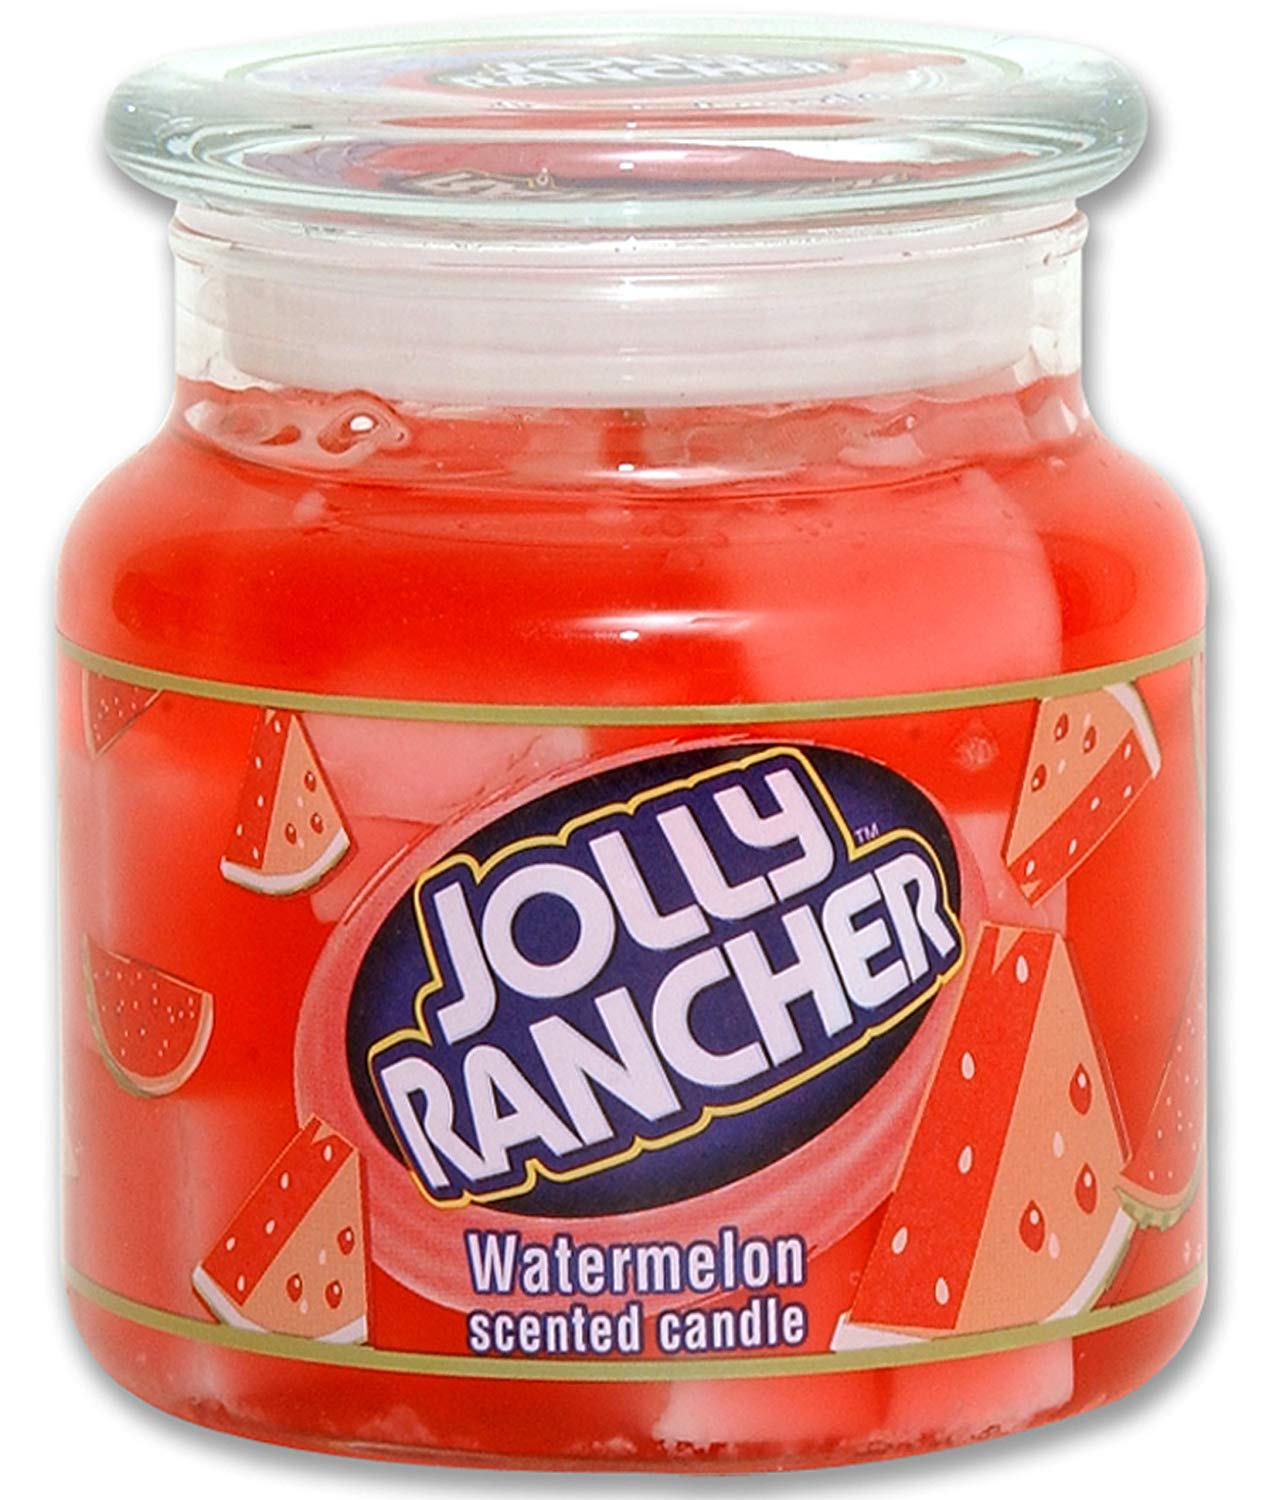 jolly rancher - Watermelon Scented candle